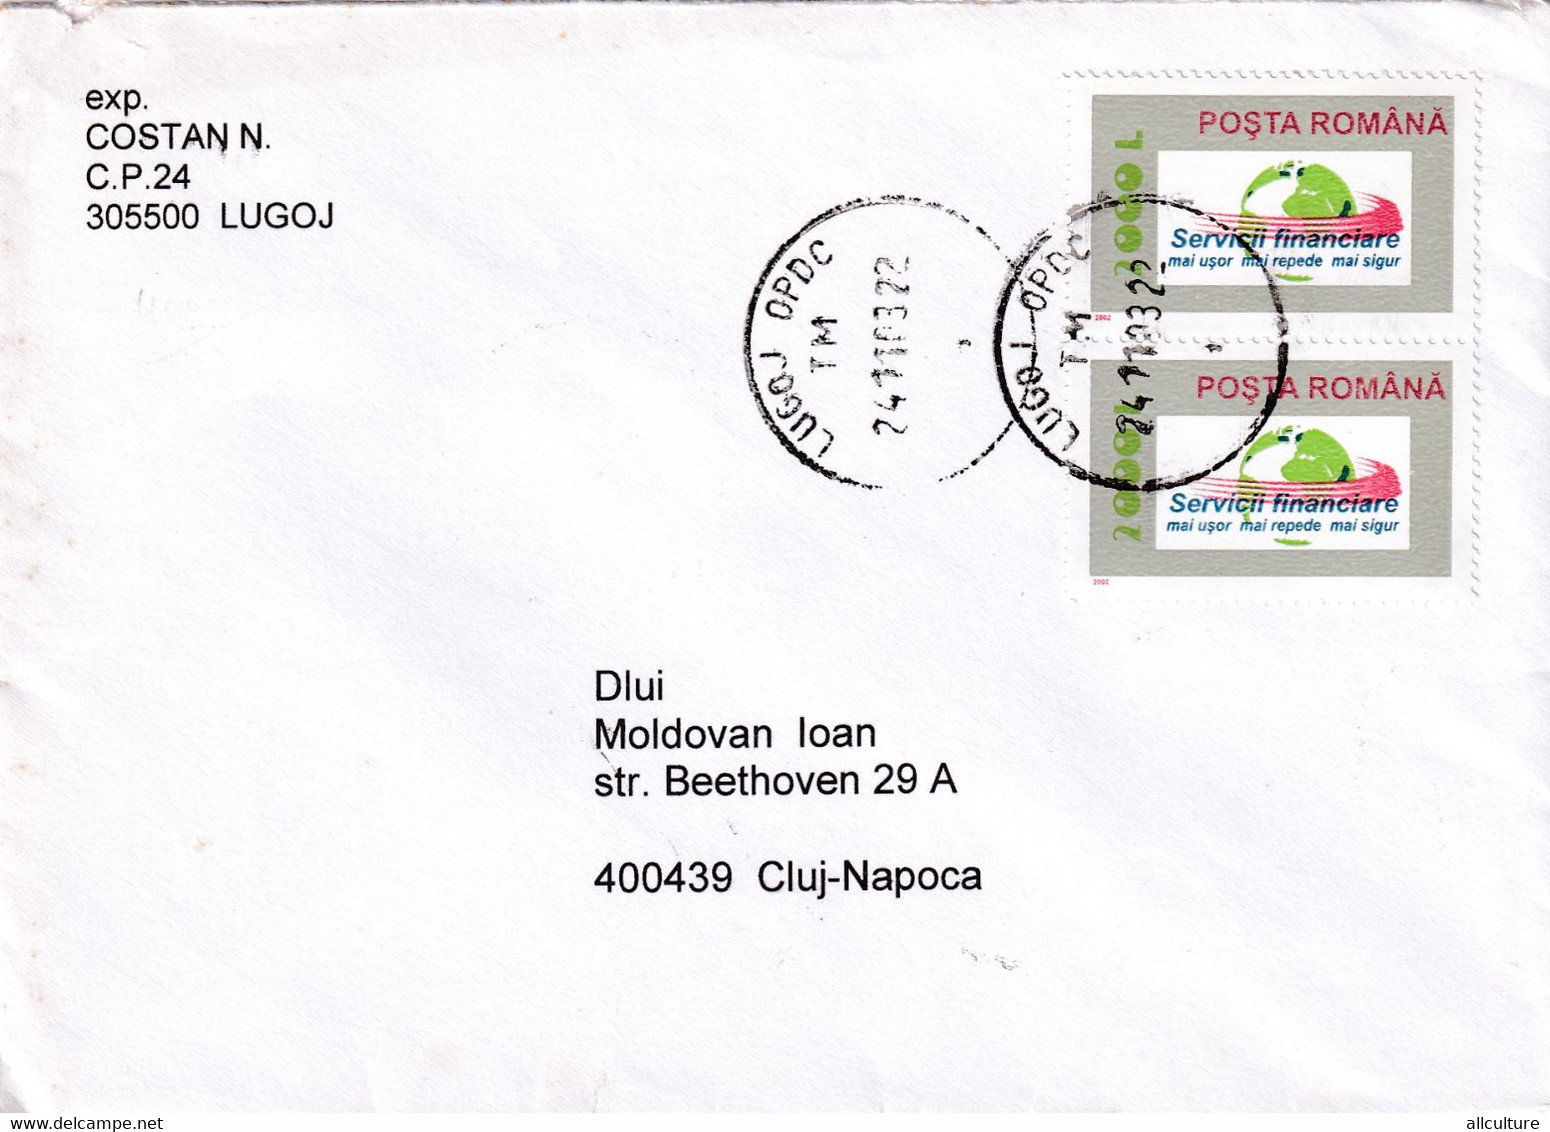 A9424-  LETTER FROM LUGOJ 2003 ROMANIA USED STAMP ON COVER ROMANIAN POSTAGE SENT TO CLUJ NAPOCA - Covers & Documents